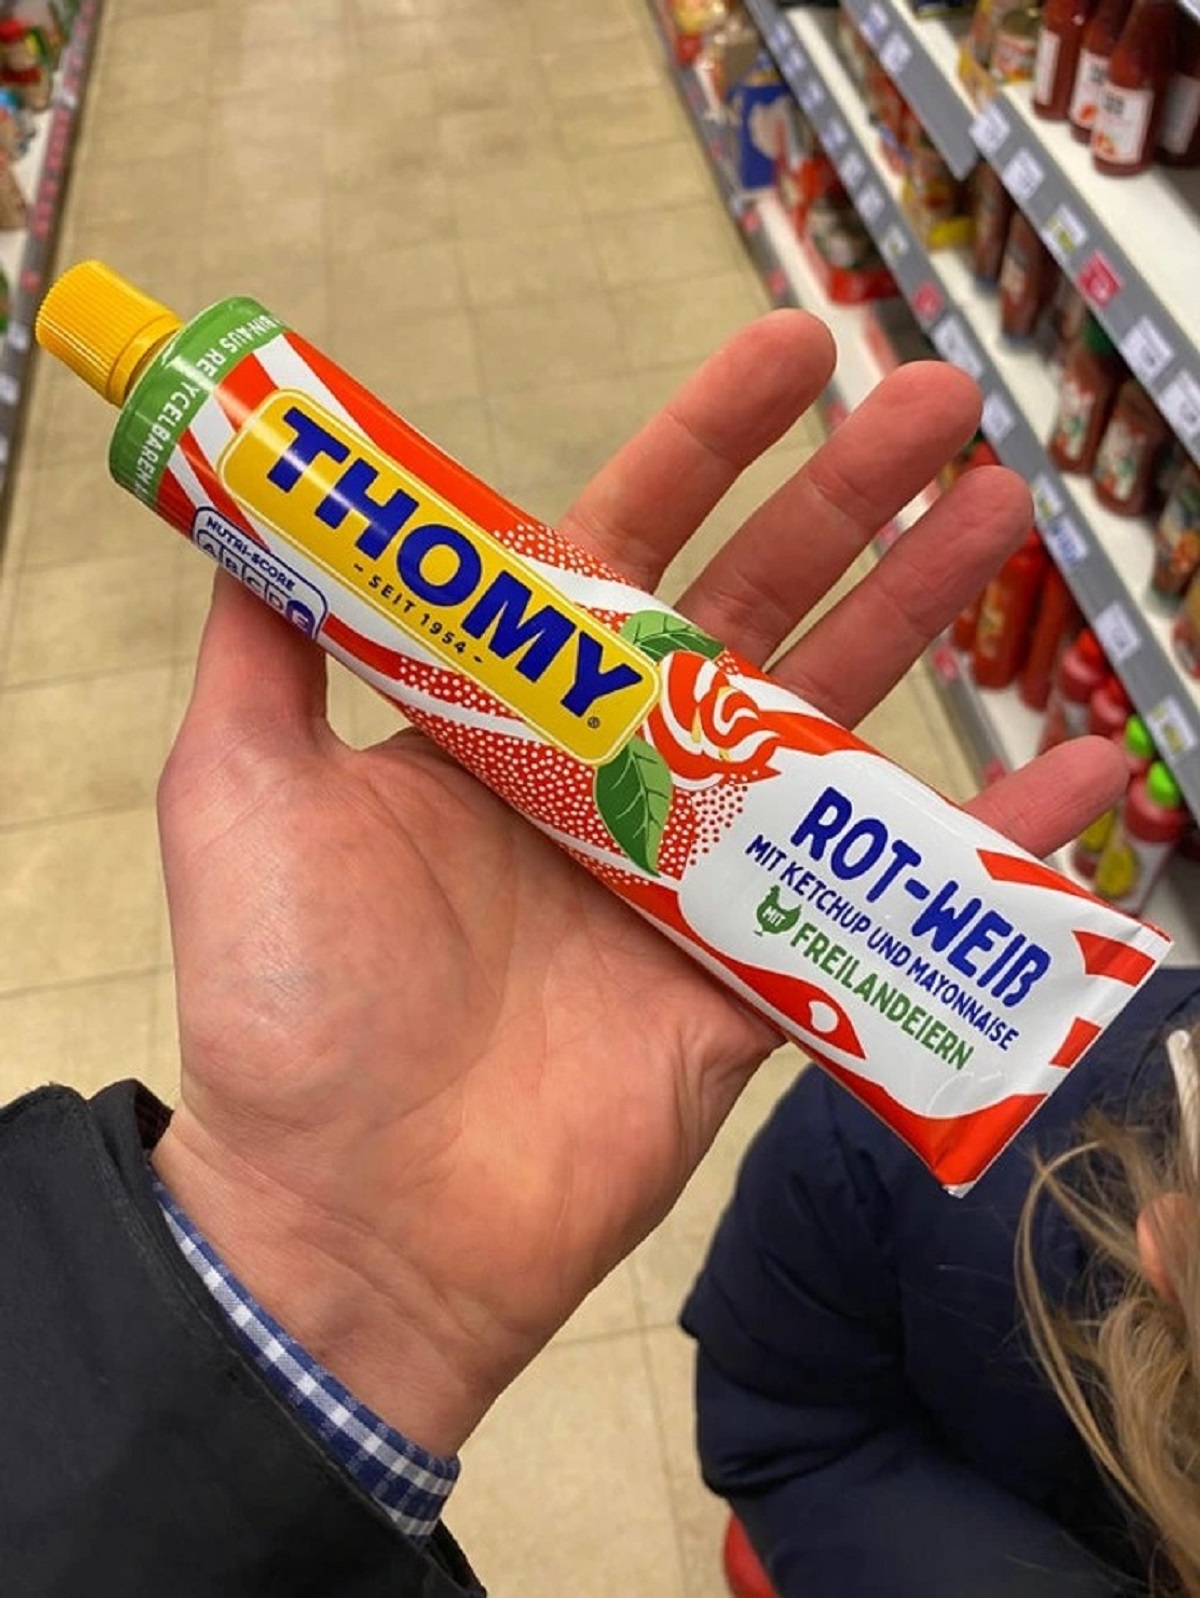 “In Germany, you can buy ketchup and mayonnaise combined in a single tube. A bit like striped toothpaste...”